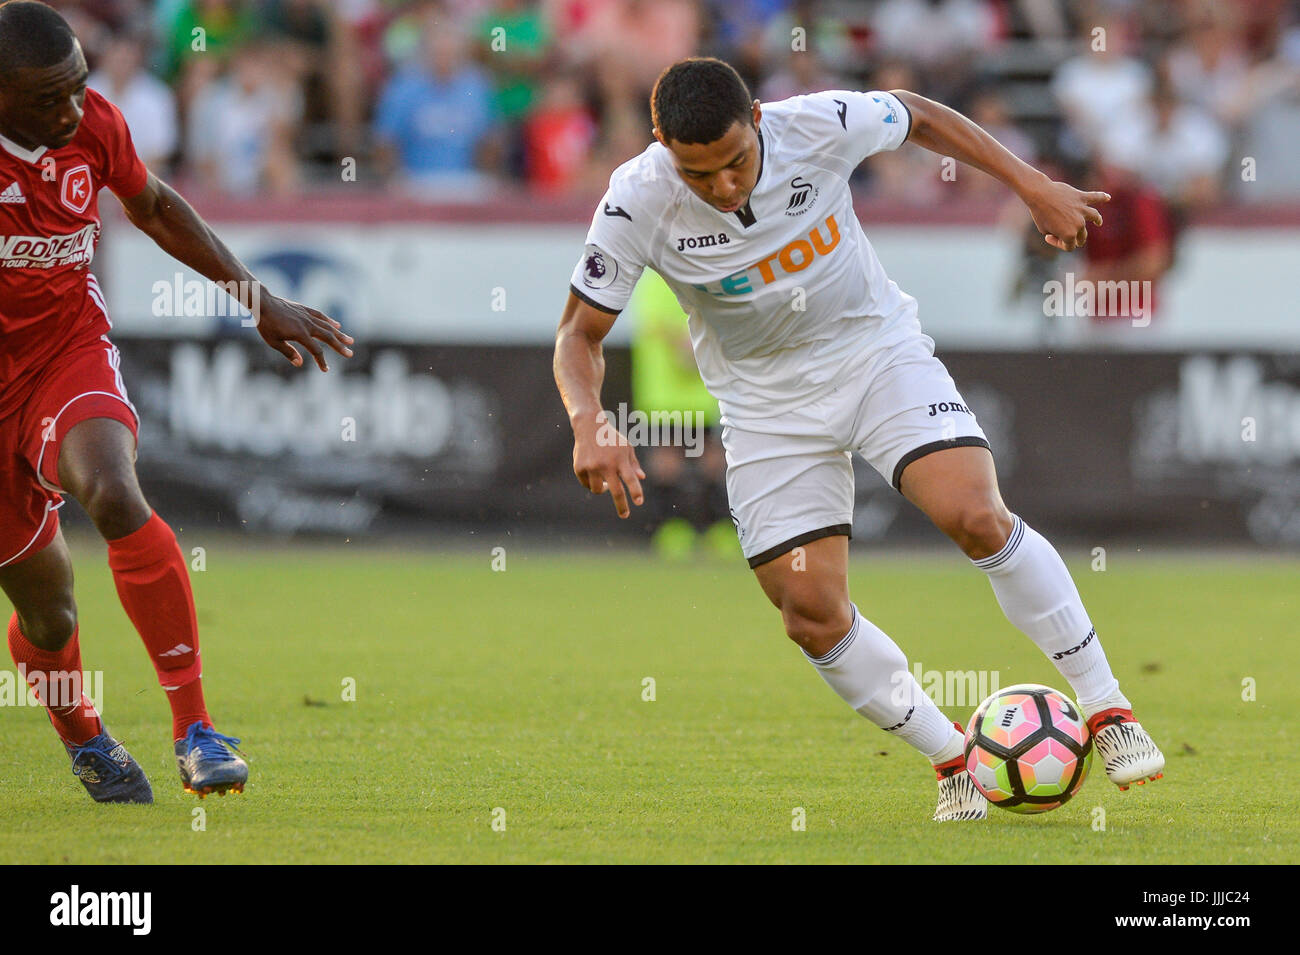 Richmond, Virginia, USA. 19th July, 2017. The Swan's midfielder JEFFERSON MONTERO (20) in action during the first half of the game held at the City Stadium, Richmond, Virginia. Credit: Amy Sanderson/ZUMA Wire/Alamy Live News Stock Photo